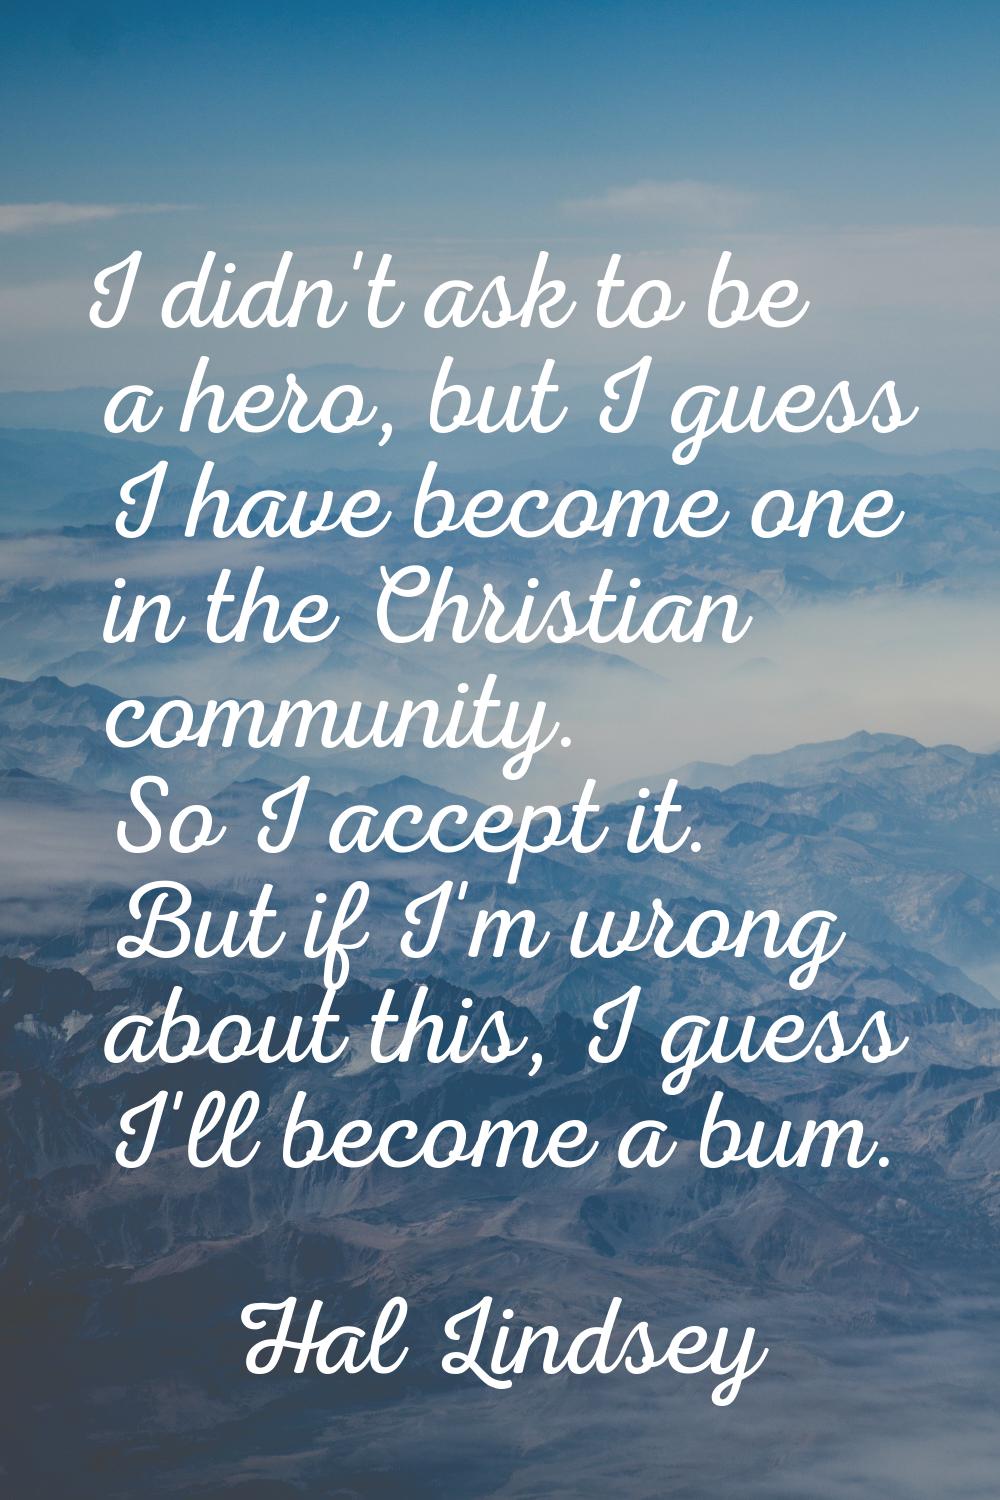 I didn't ask to be a hero, but I guess I have become one in the Christian community. So I accept it